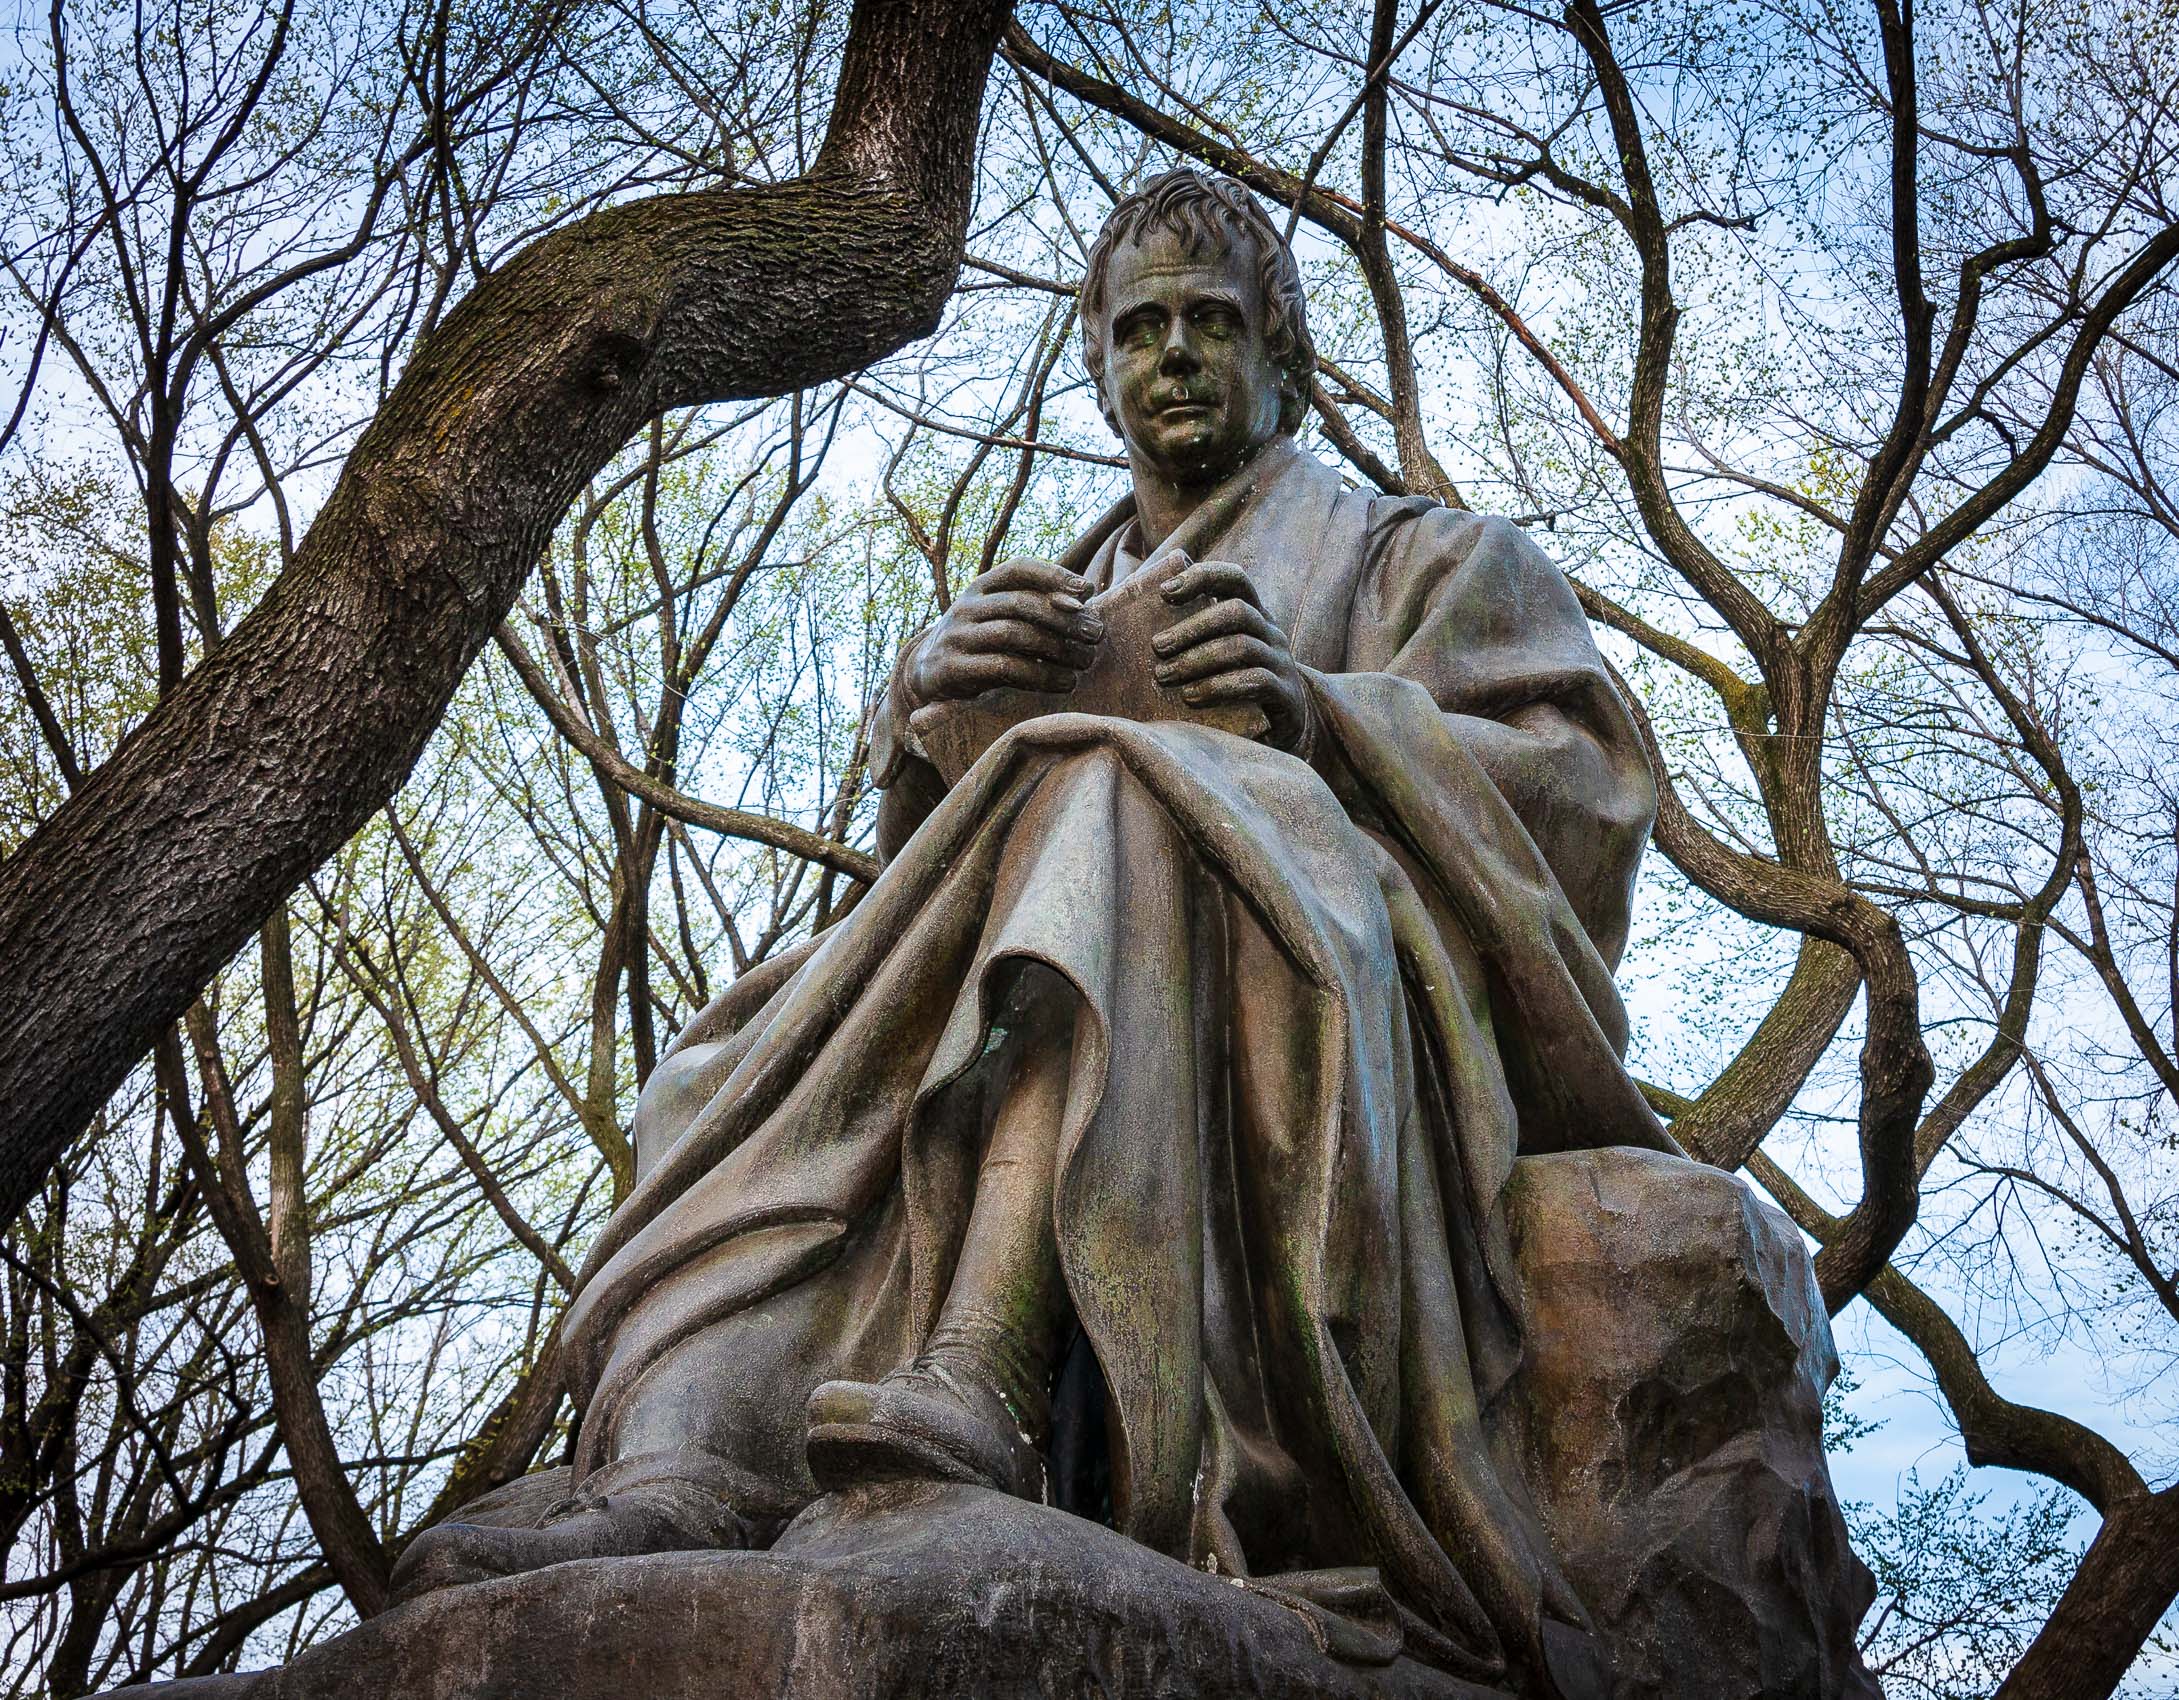 Statue of Sir Walter Scott in Central Park, New York City. NY022